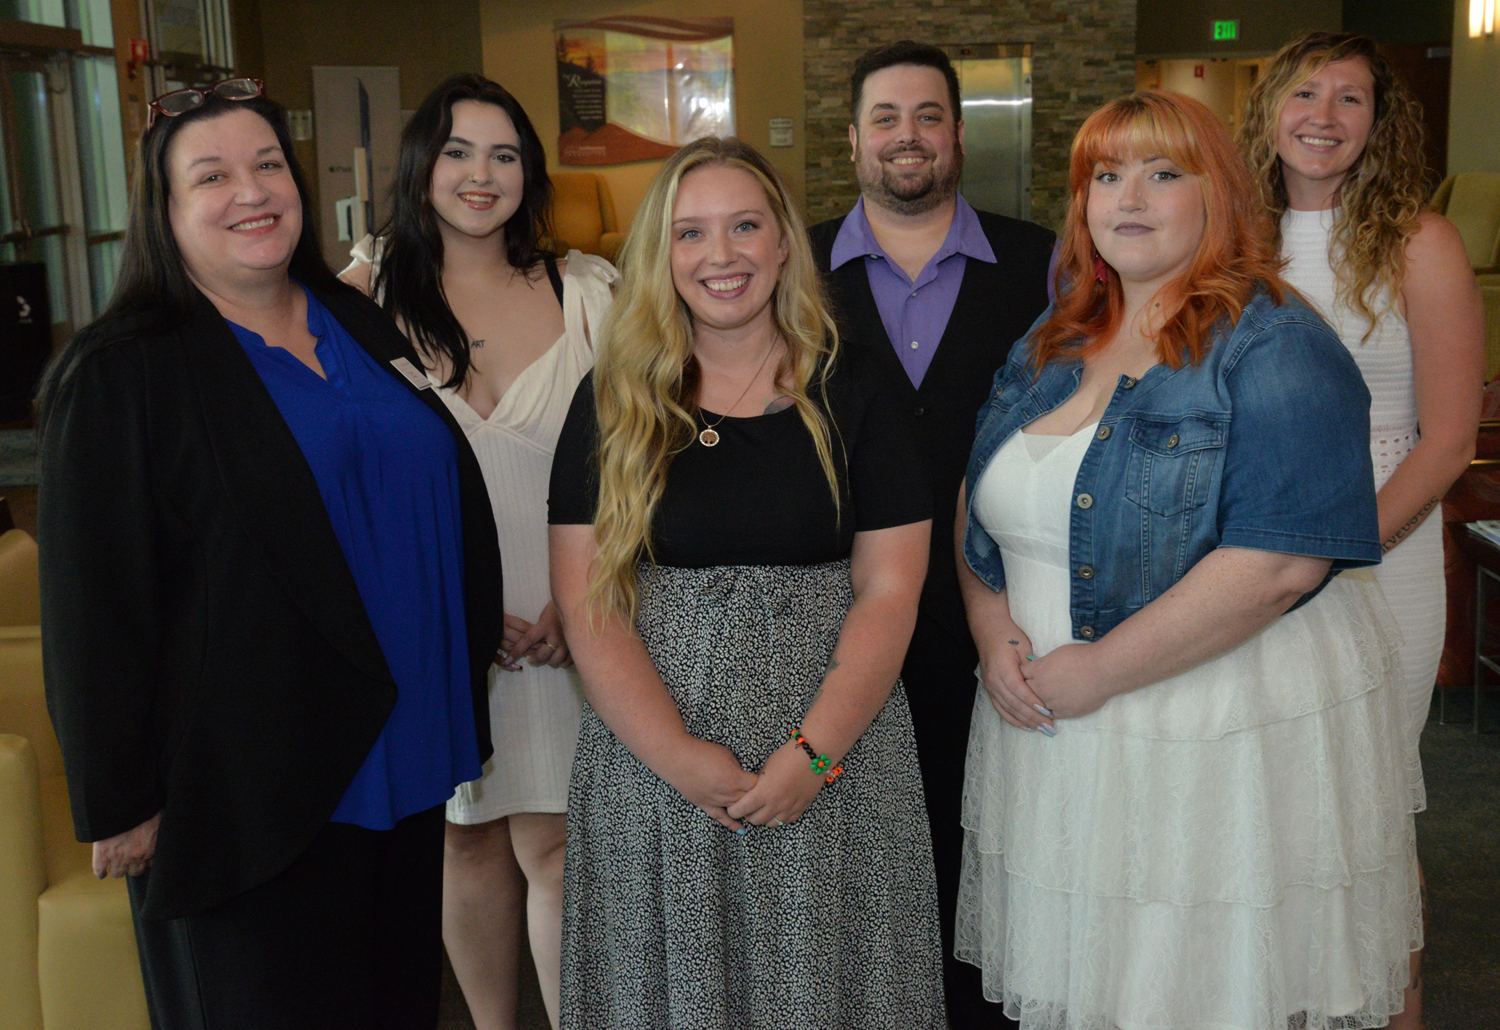 Recent graduates of SCC's Human Services Technology program are pictured here with coordinator and instructor Crystal Rhynes (far left). Beside Rhynes are, from left: Railey Martin of Sylva, Kayla Smathers of Cherokee, Matt Litchford of Franklin, Ashley Moore of Clyde and Katelynn Ledford-McCoy of Cherokee.